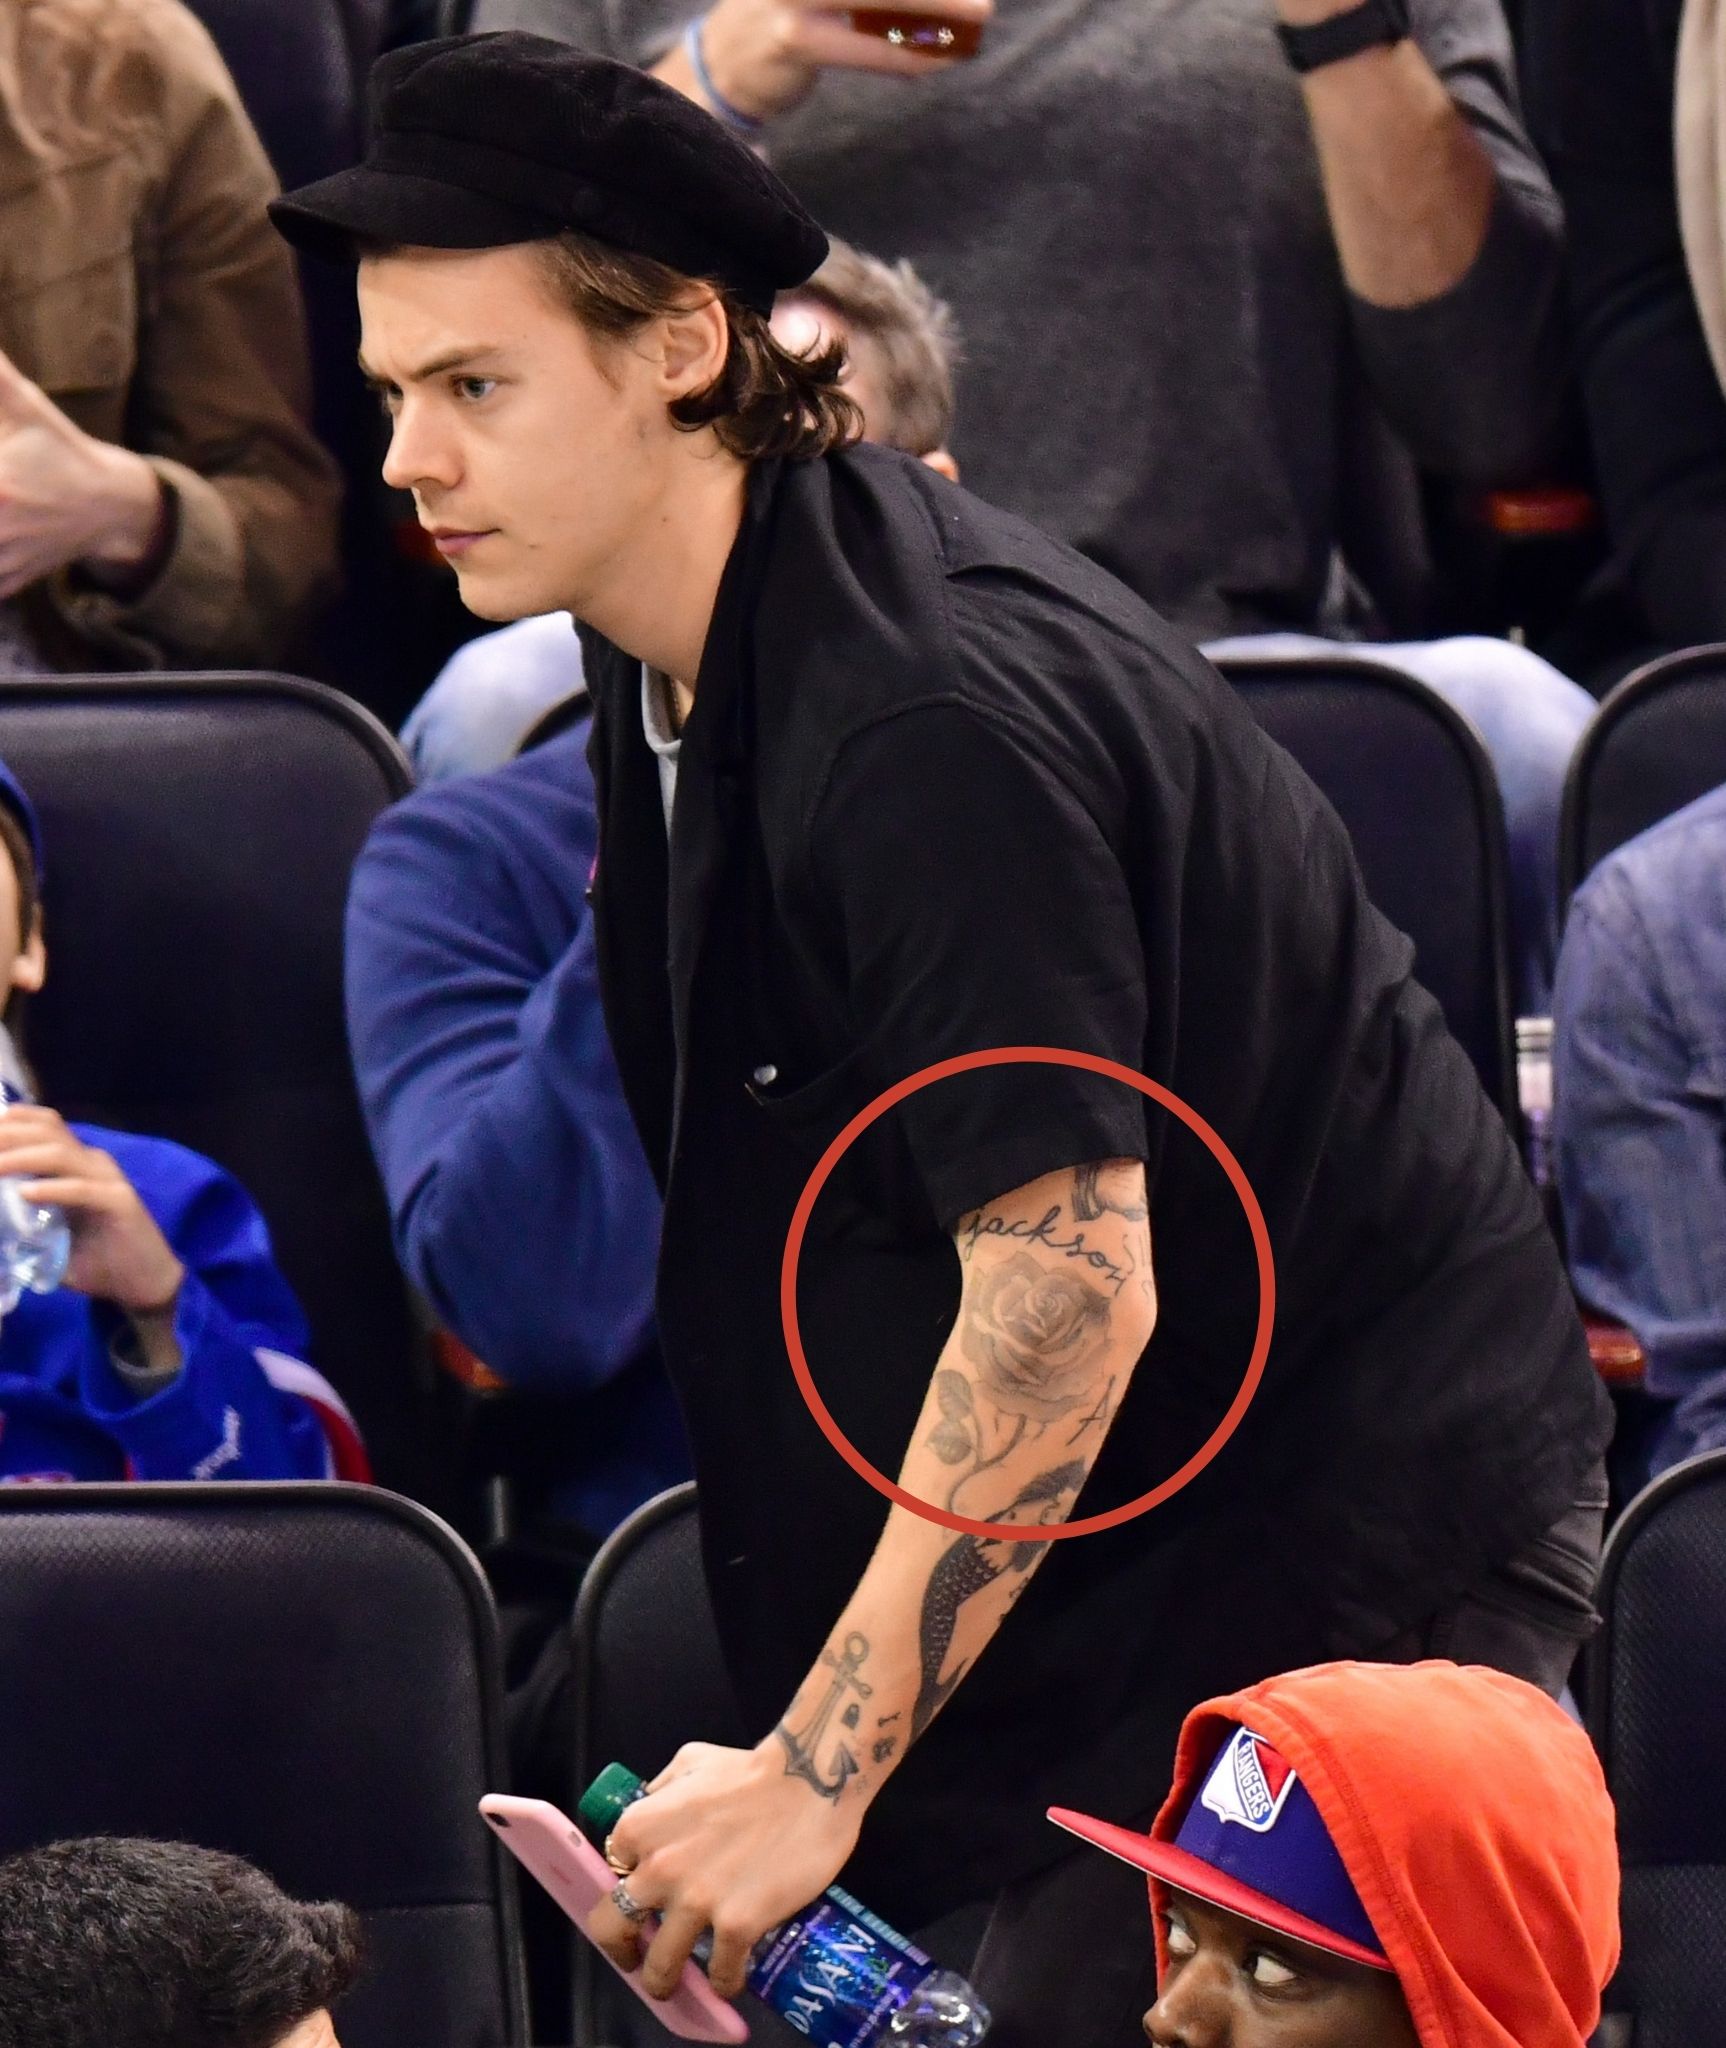 The Tattoo Harry Styles Definitely Didnt Get In A Tattoo Parlor